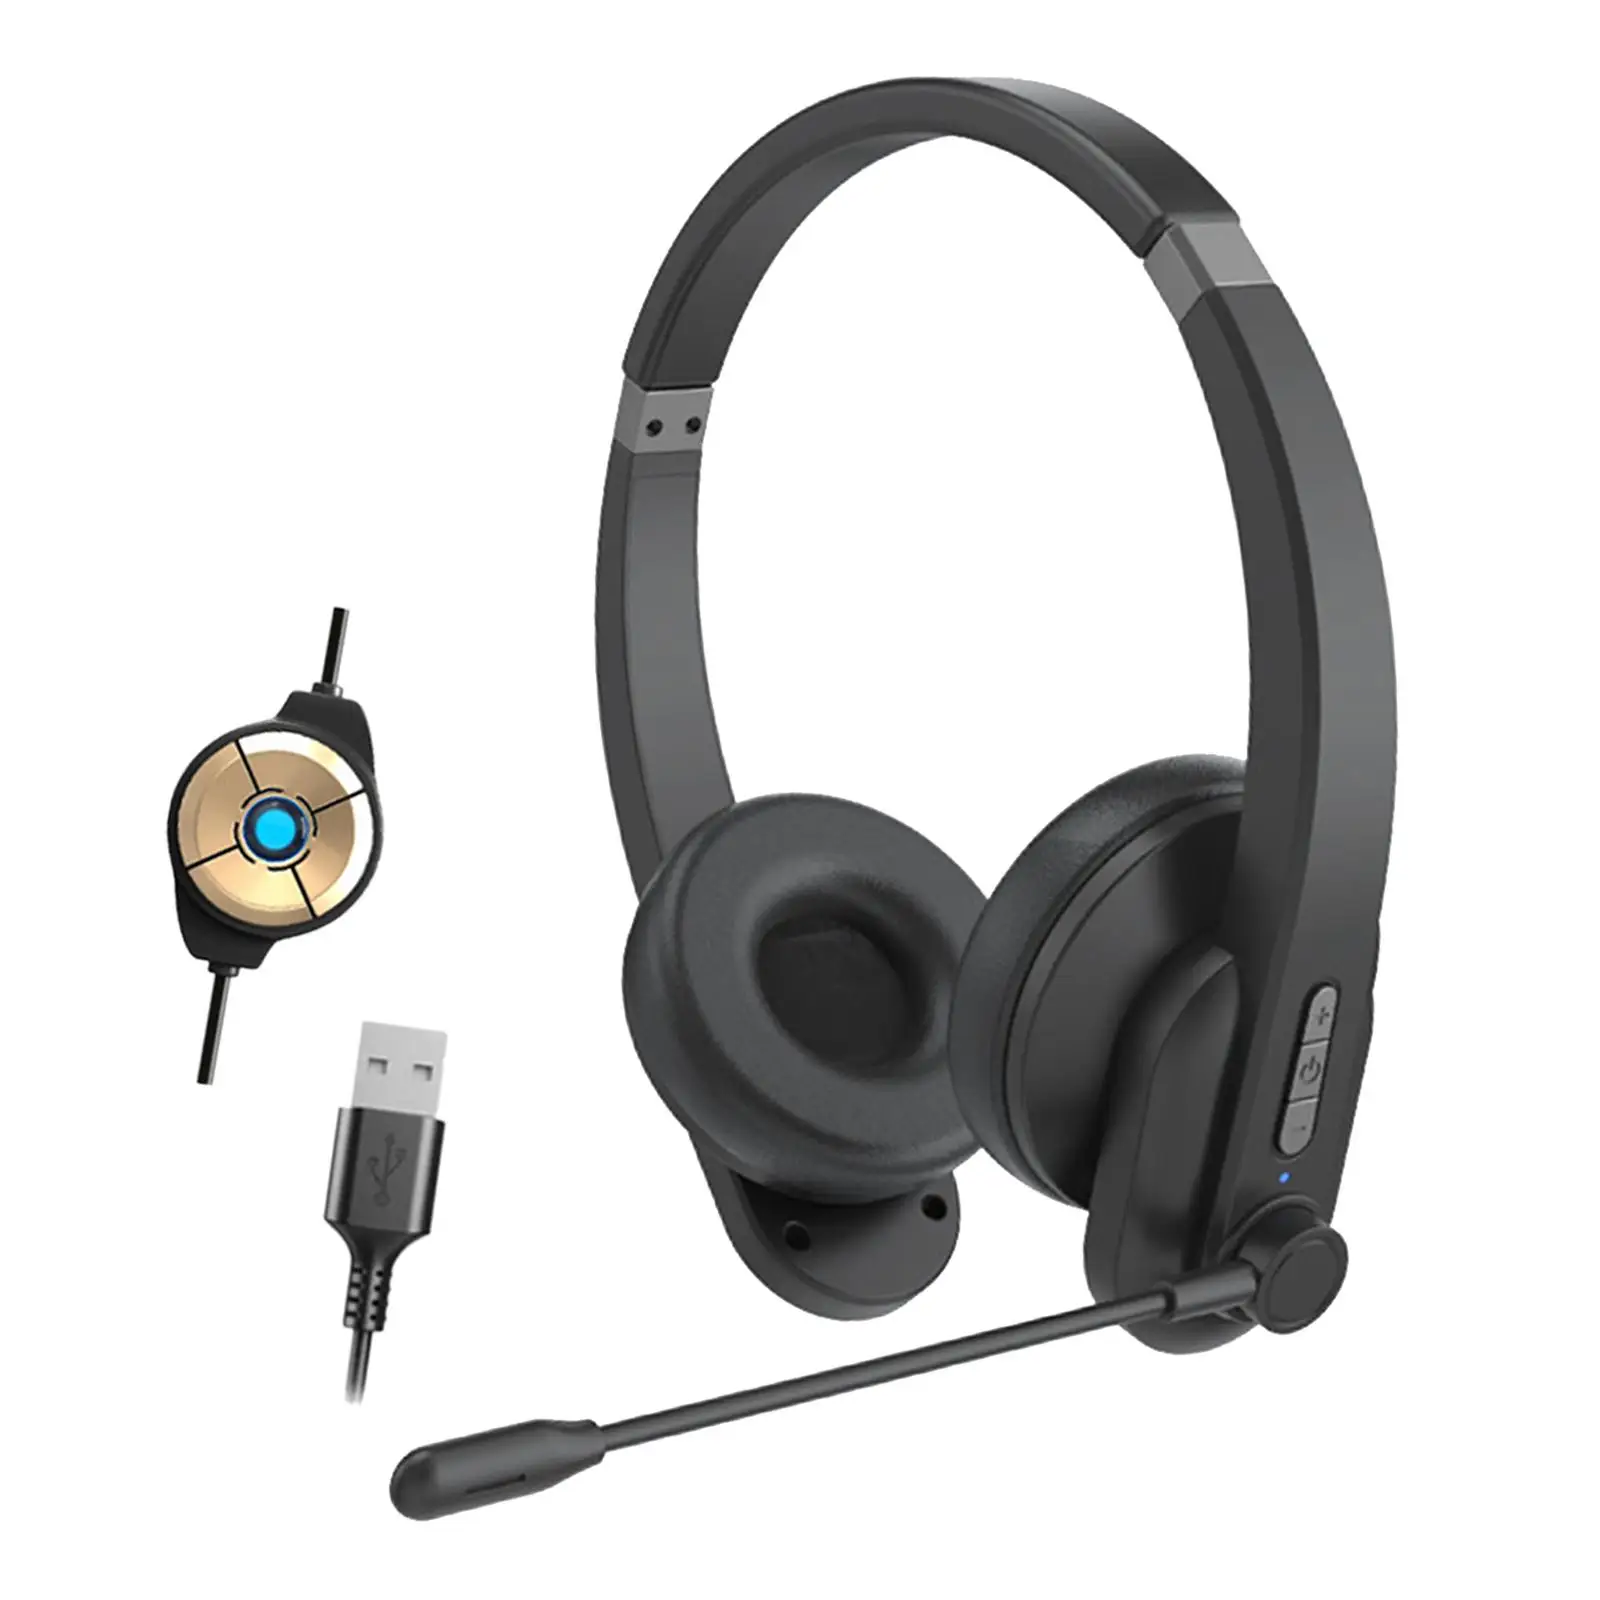 Bluetooth Headset with Noise Cancelling Microphone Soft Ear Cups HiFi Stereo Clear Calls Over Ear Headsets for Call Center Home